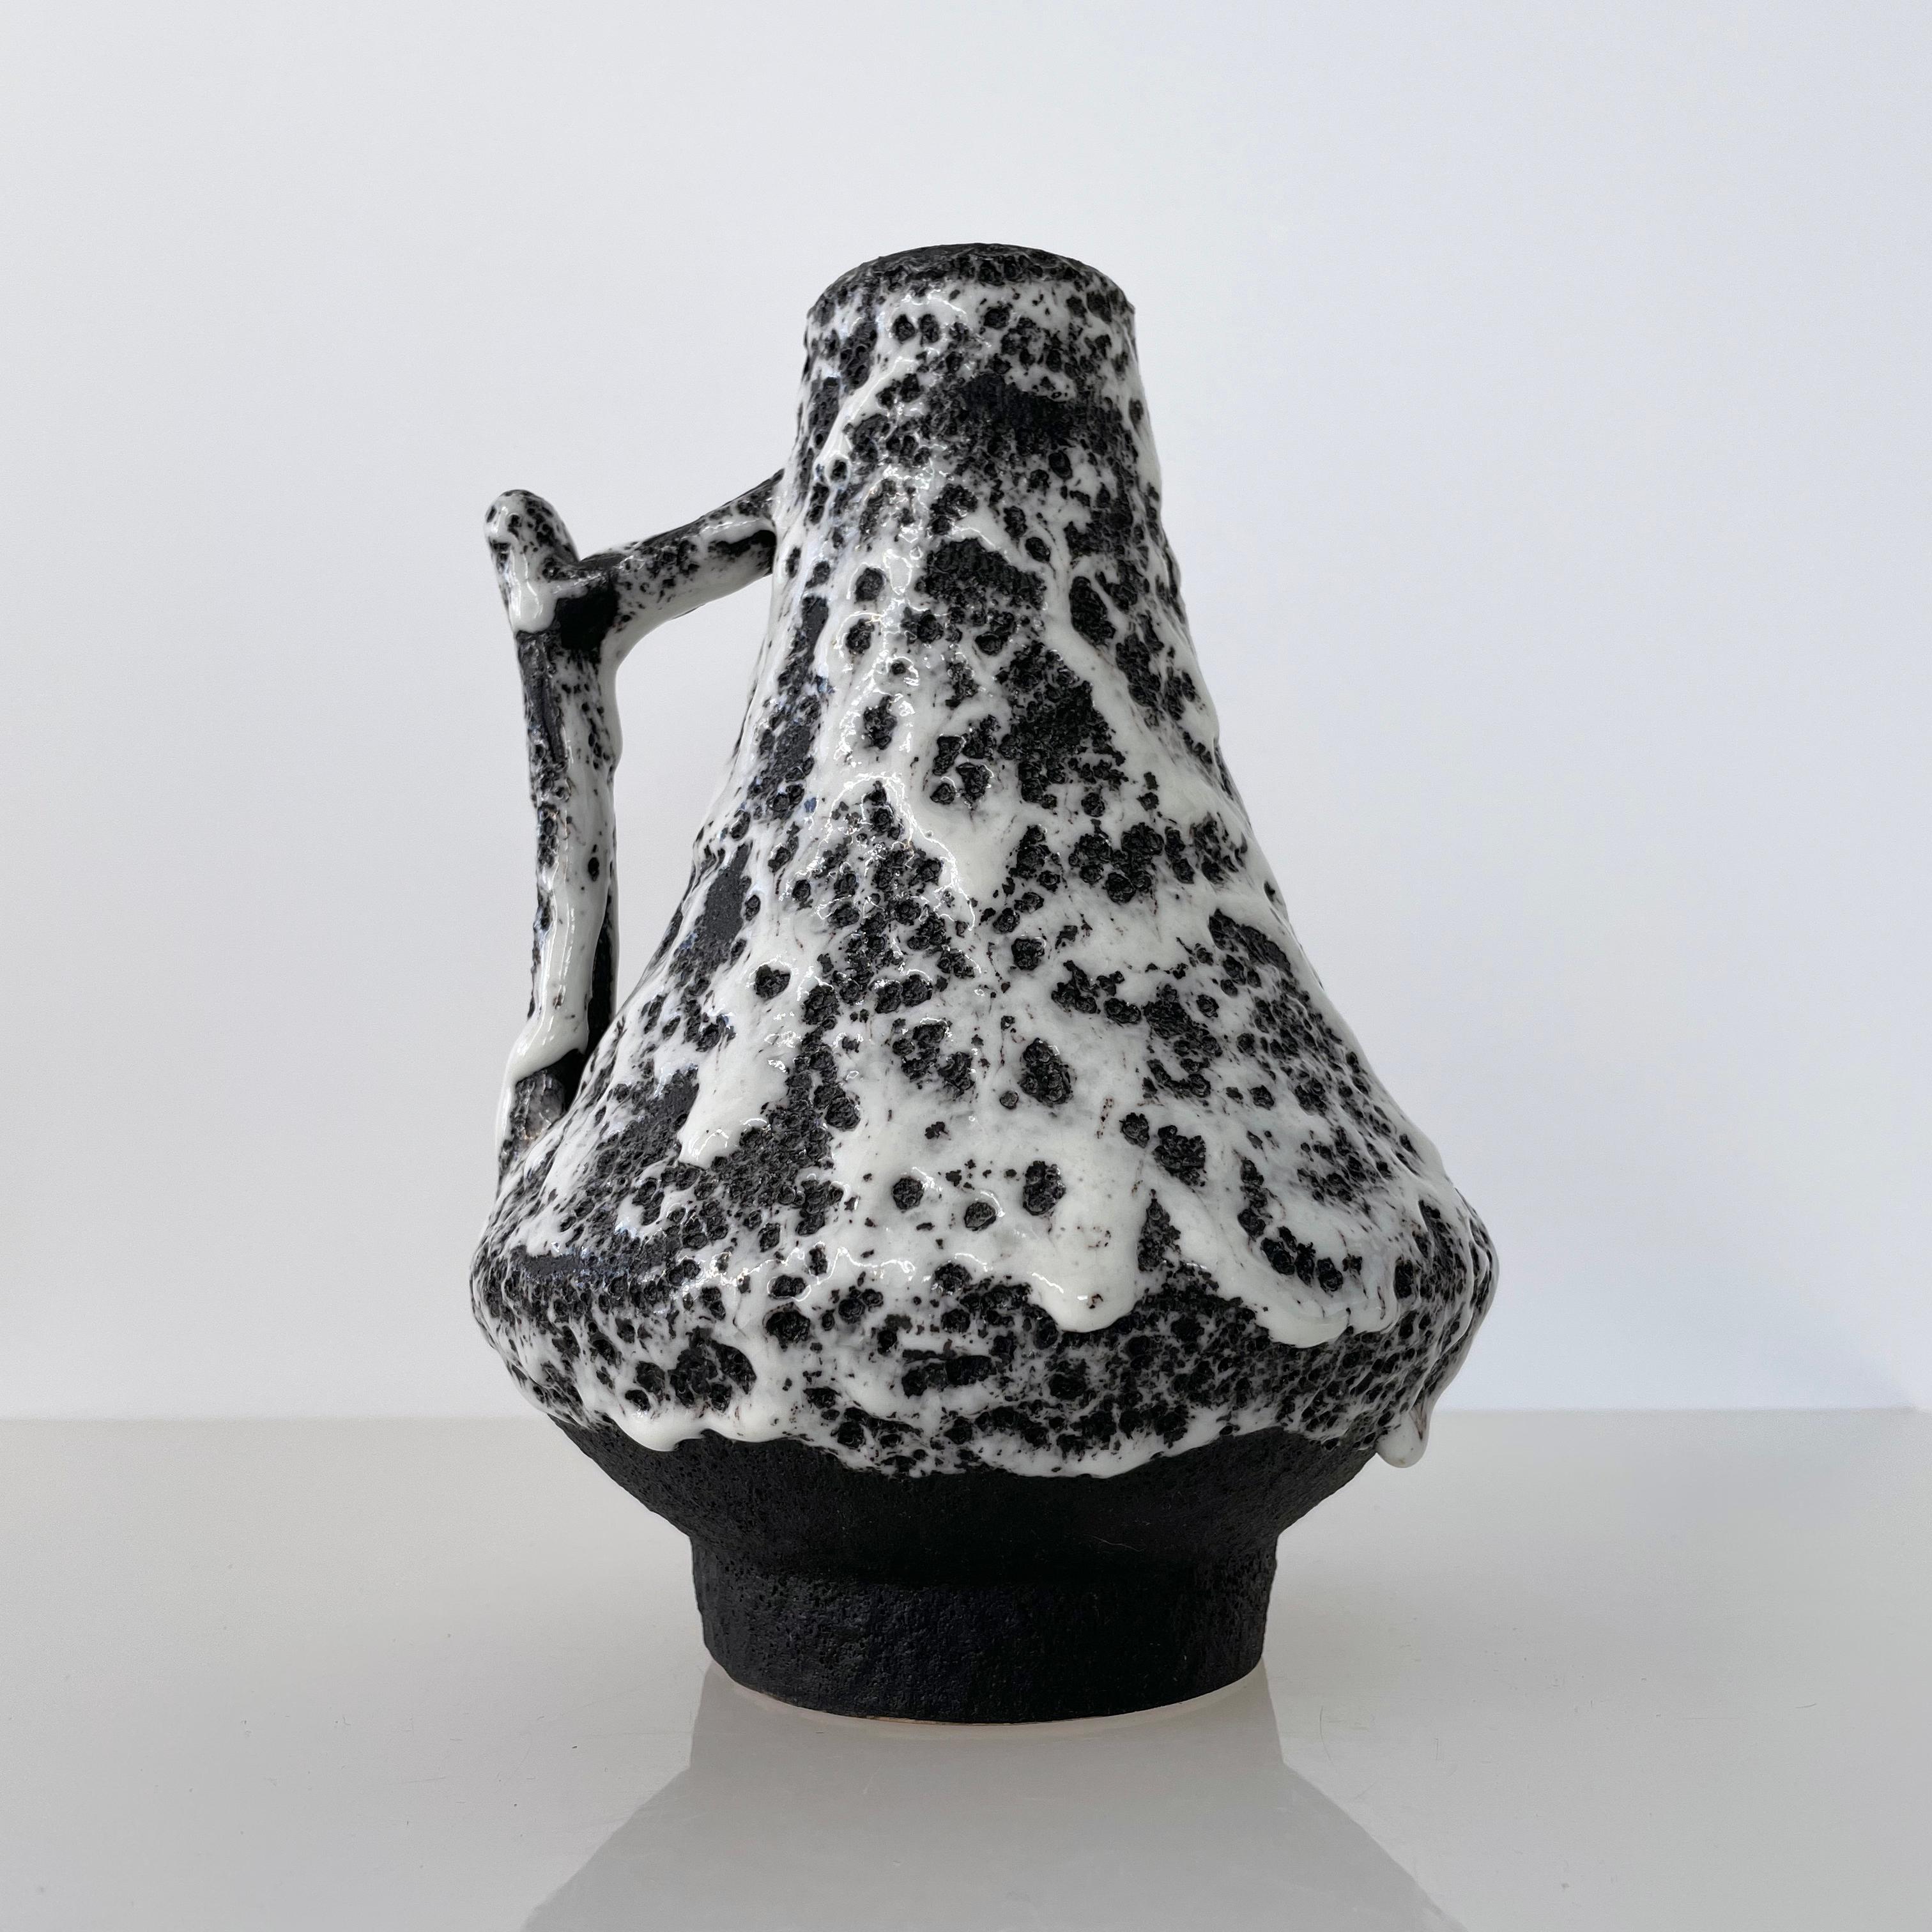 West German decorative vase produced by Fat Lava Keramik (W.Germany) in the early to mid-1970s. Features a black and white crackle glaze. Numbered on base: W.Germany 44-20 (20cm in height). Fat Lava style.